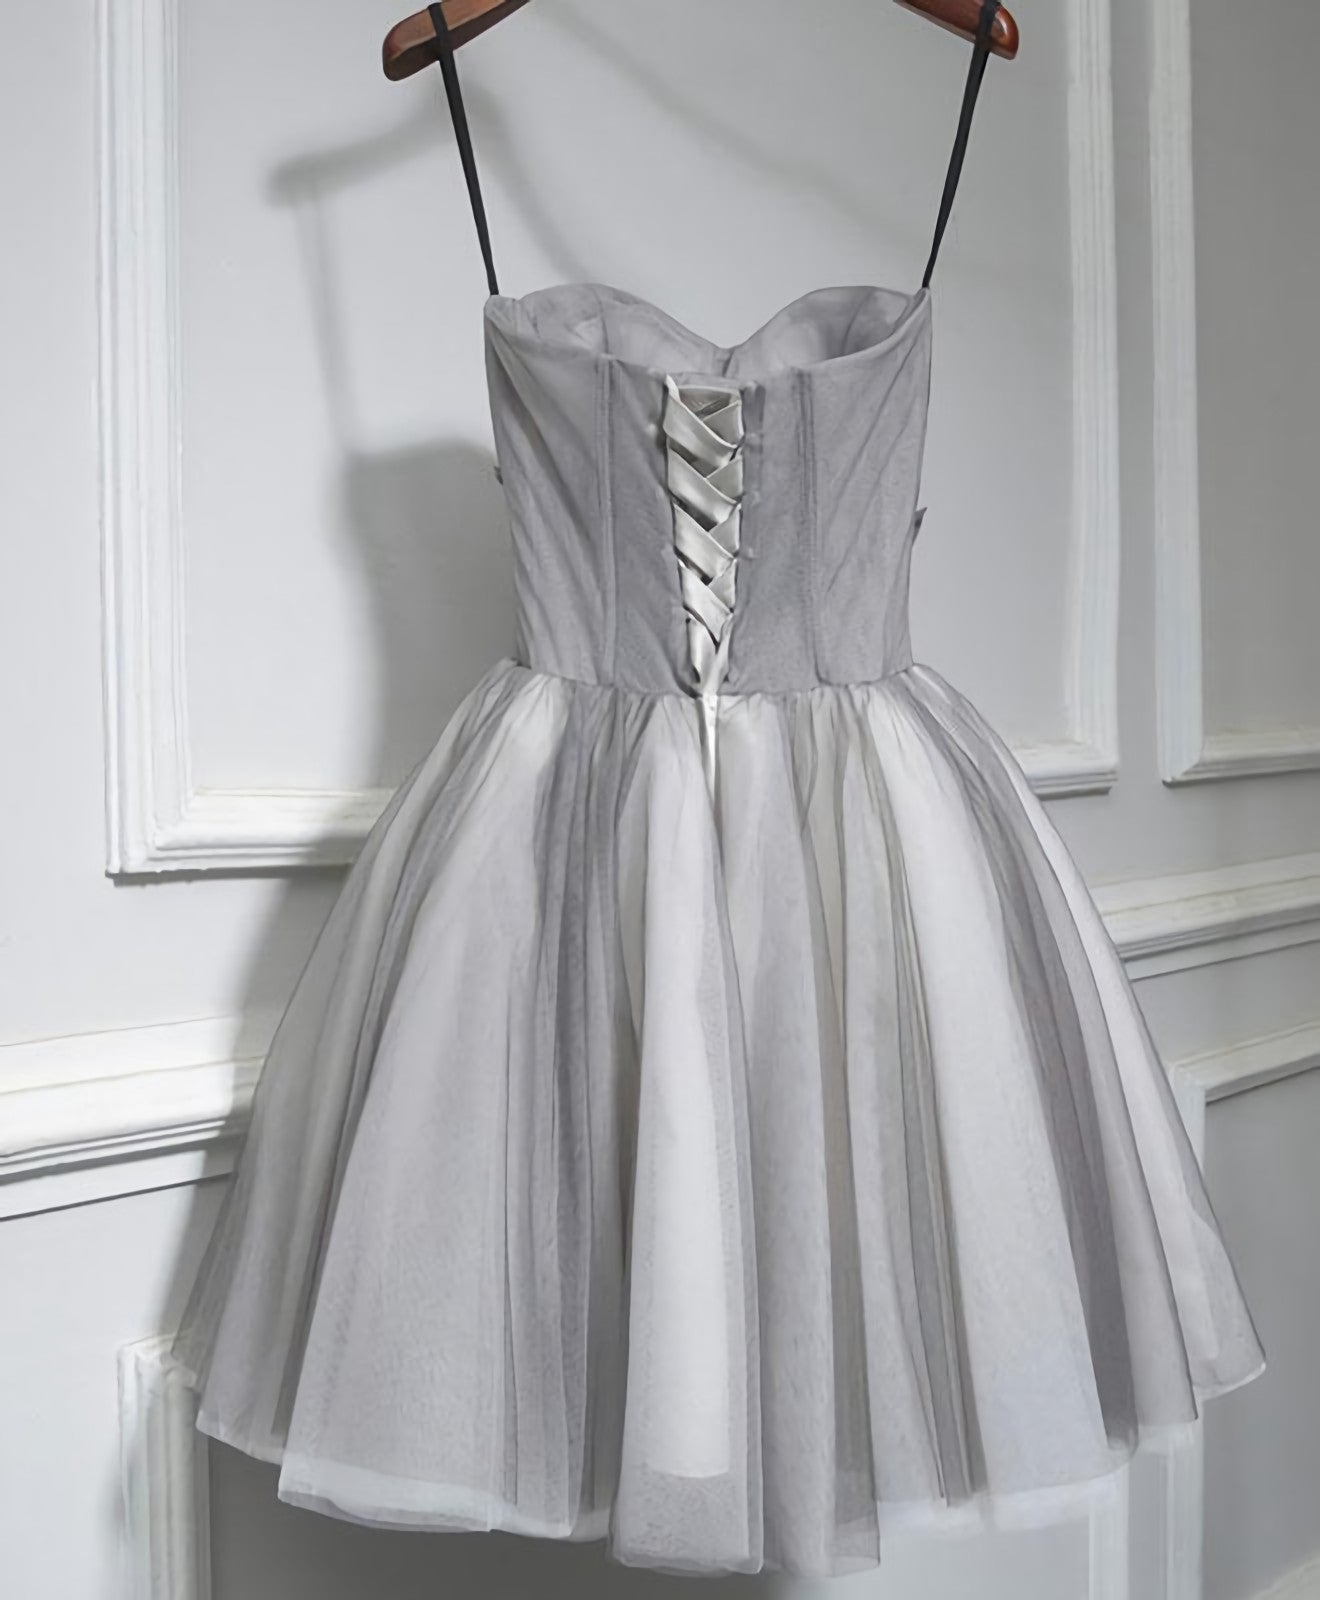 Party Dresses Winter, Gray Tulle Short A Line Prom Dress, Homecoming Dress